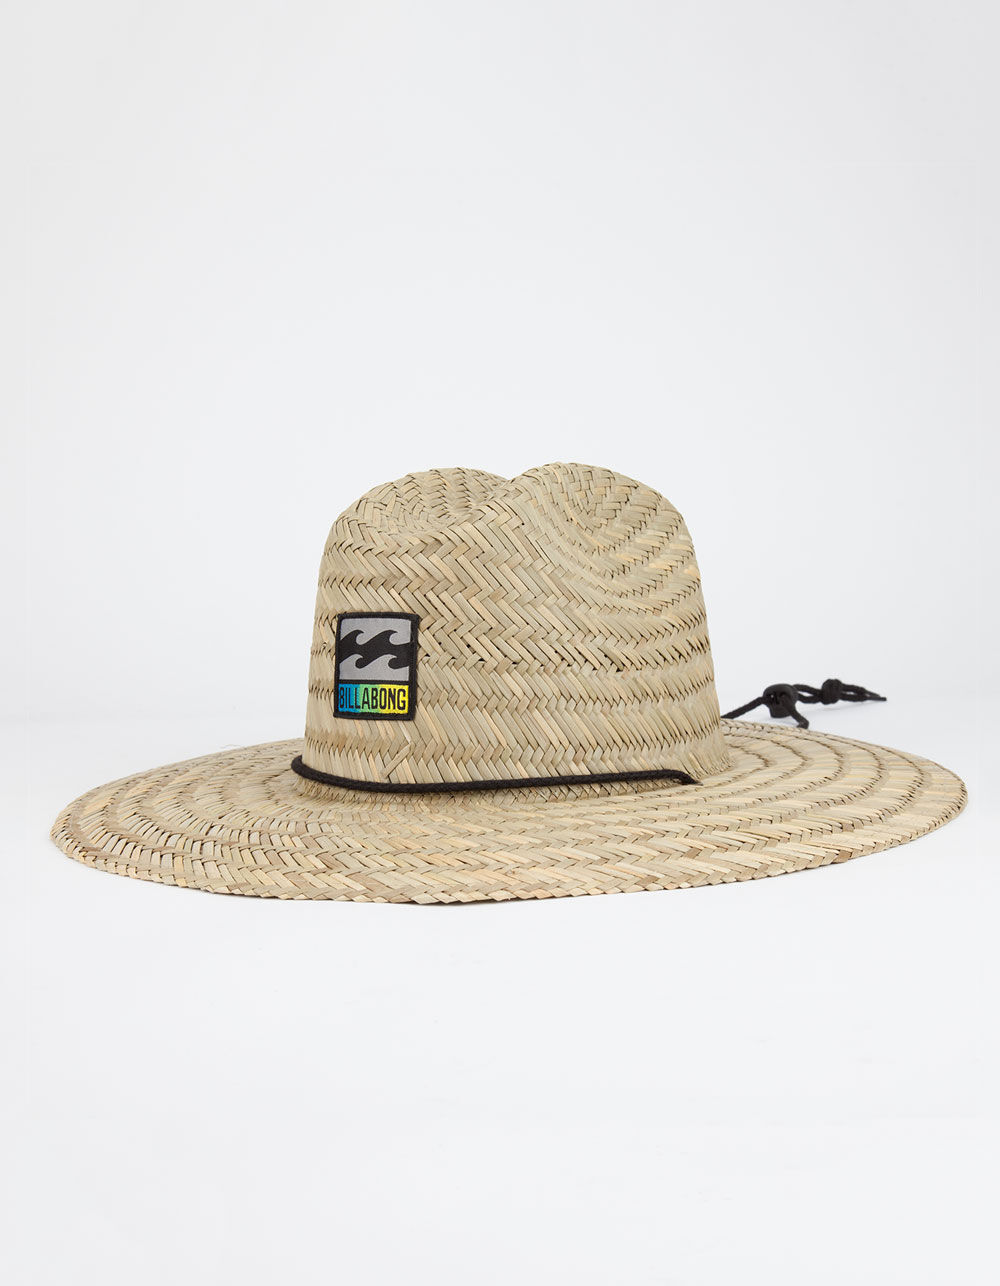 BILLABONG Patches Mens Lifeguard Straw Hat image number 0